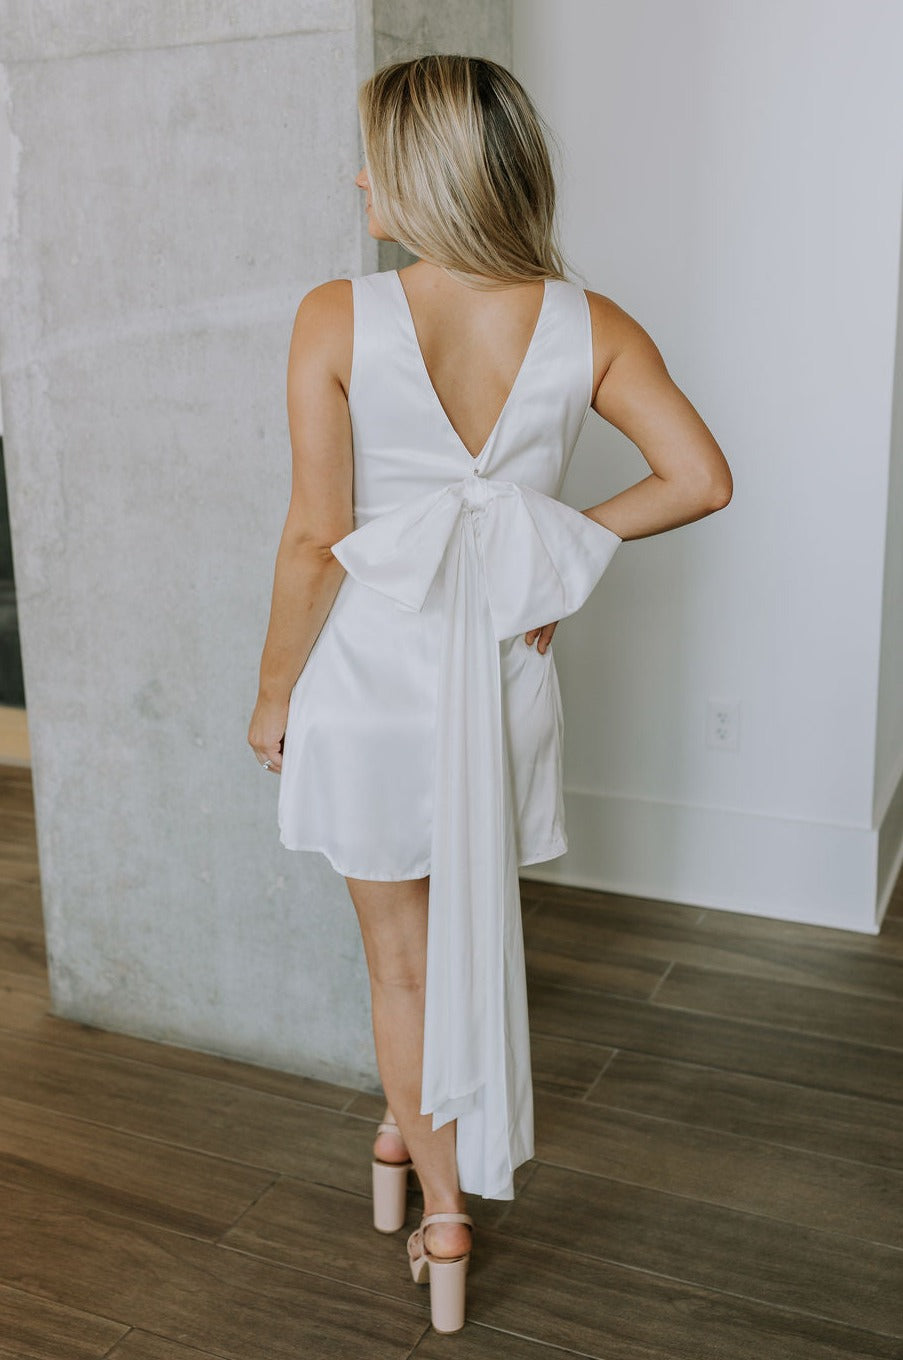 back view of female model wearing the Melissa White Satin Bow Mini Dress which features White Satin Fabric, White Lining, Mini Length, Round Neckline, Sleeveless, Side Monochrome Zipper with Hook Closure and Bow Detail